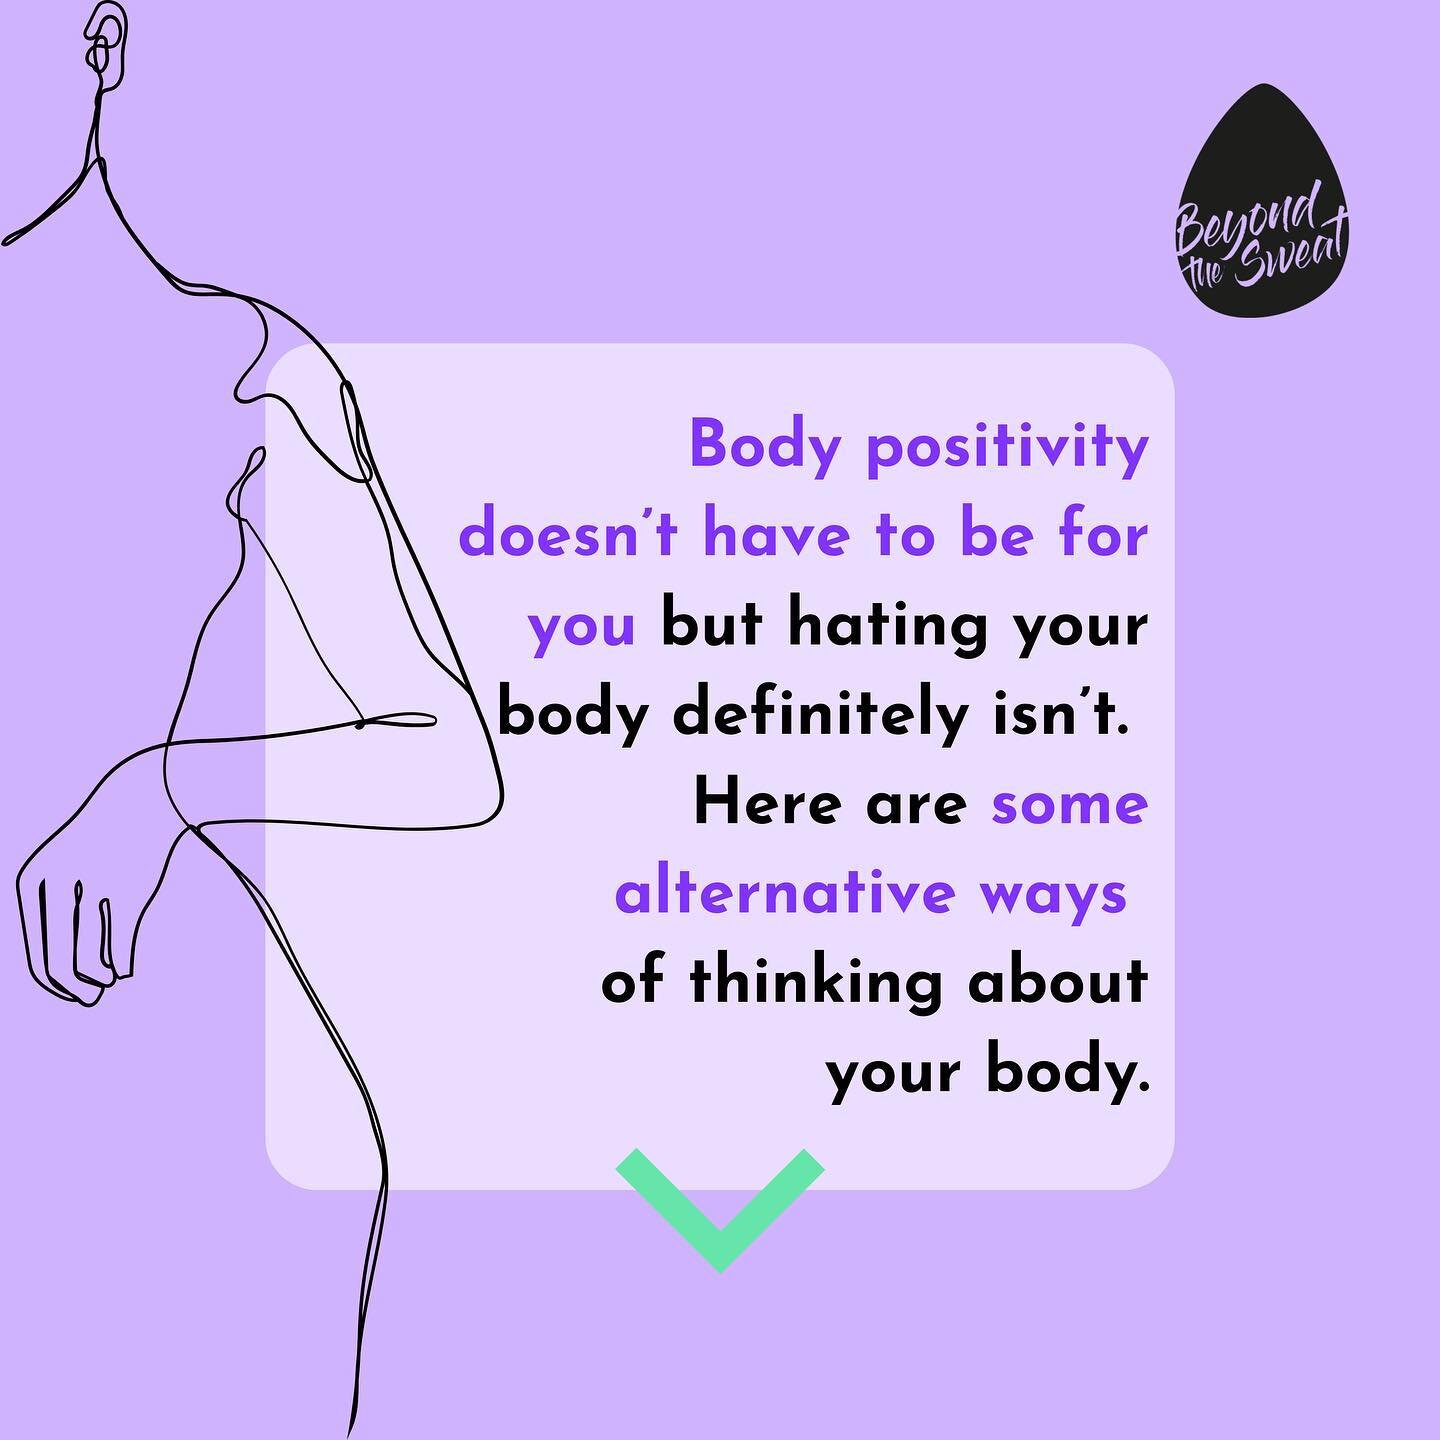 Often, people are resistant to working on body image because &quot;I'm just not ready to love the body I'm in yet&quot;.

Guess what - that's okay!
You don't have to.

But what a lot of people still want is for negative thoughts about their body to t